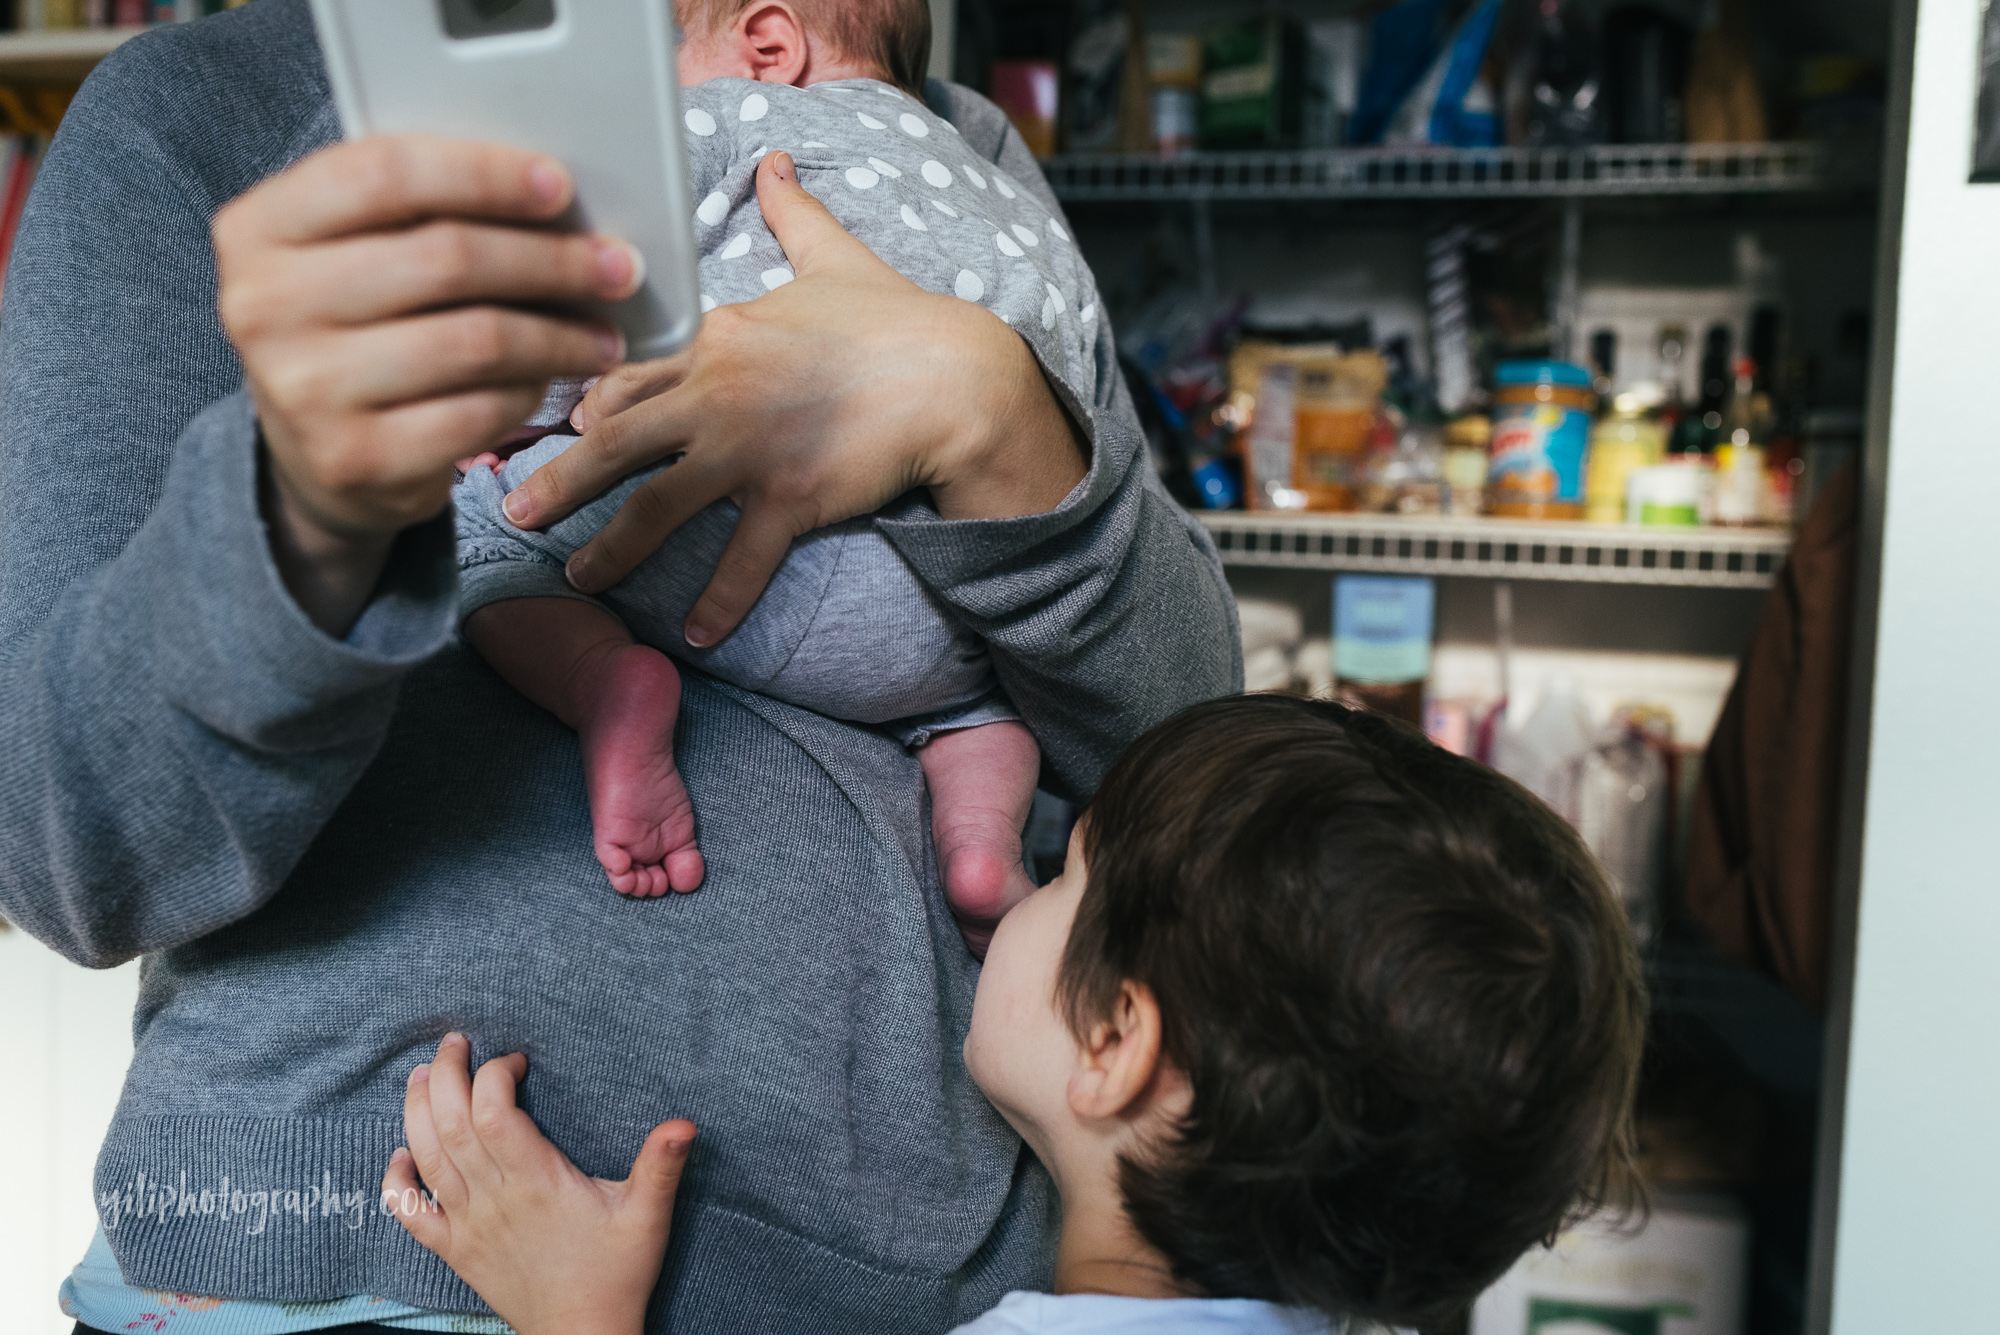 seattle mom checking smartphone while holding newborn girl